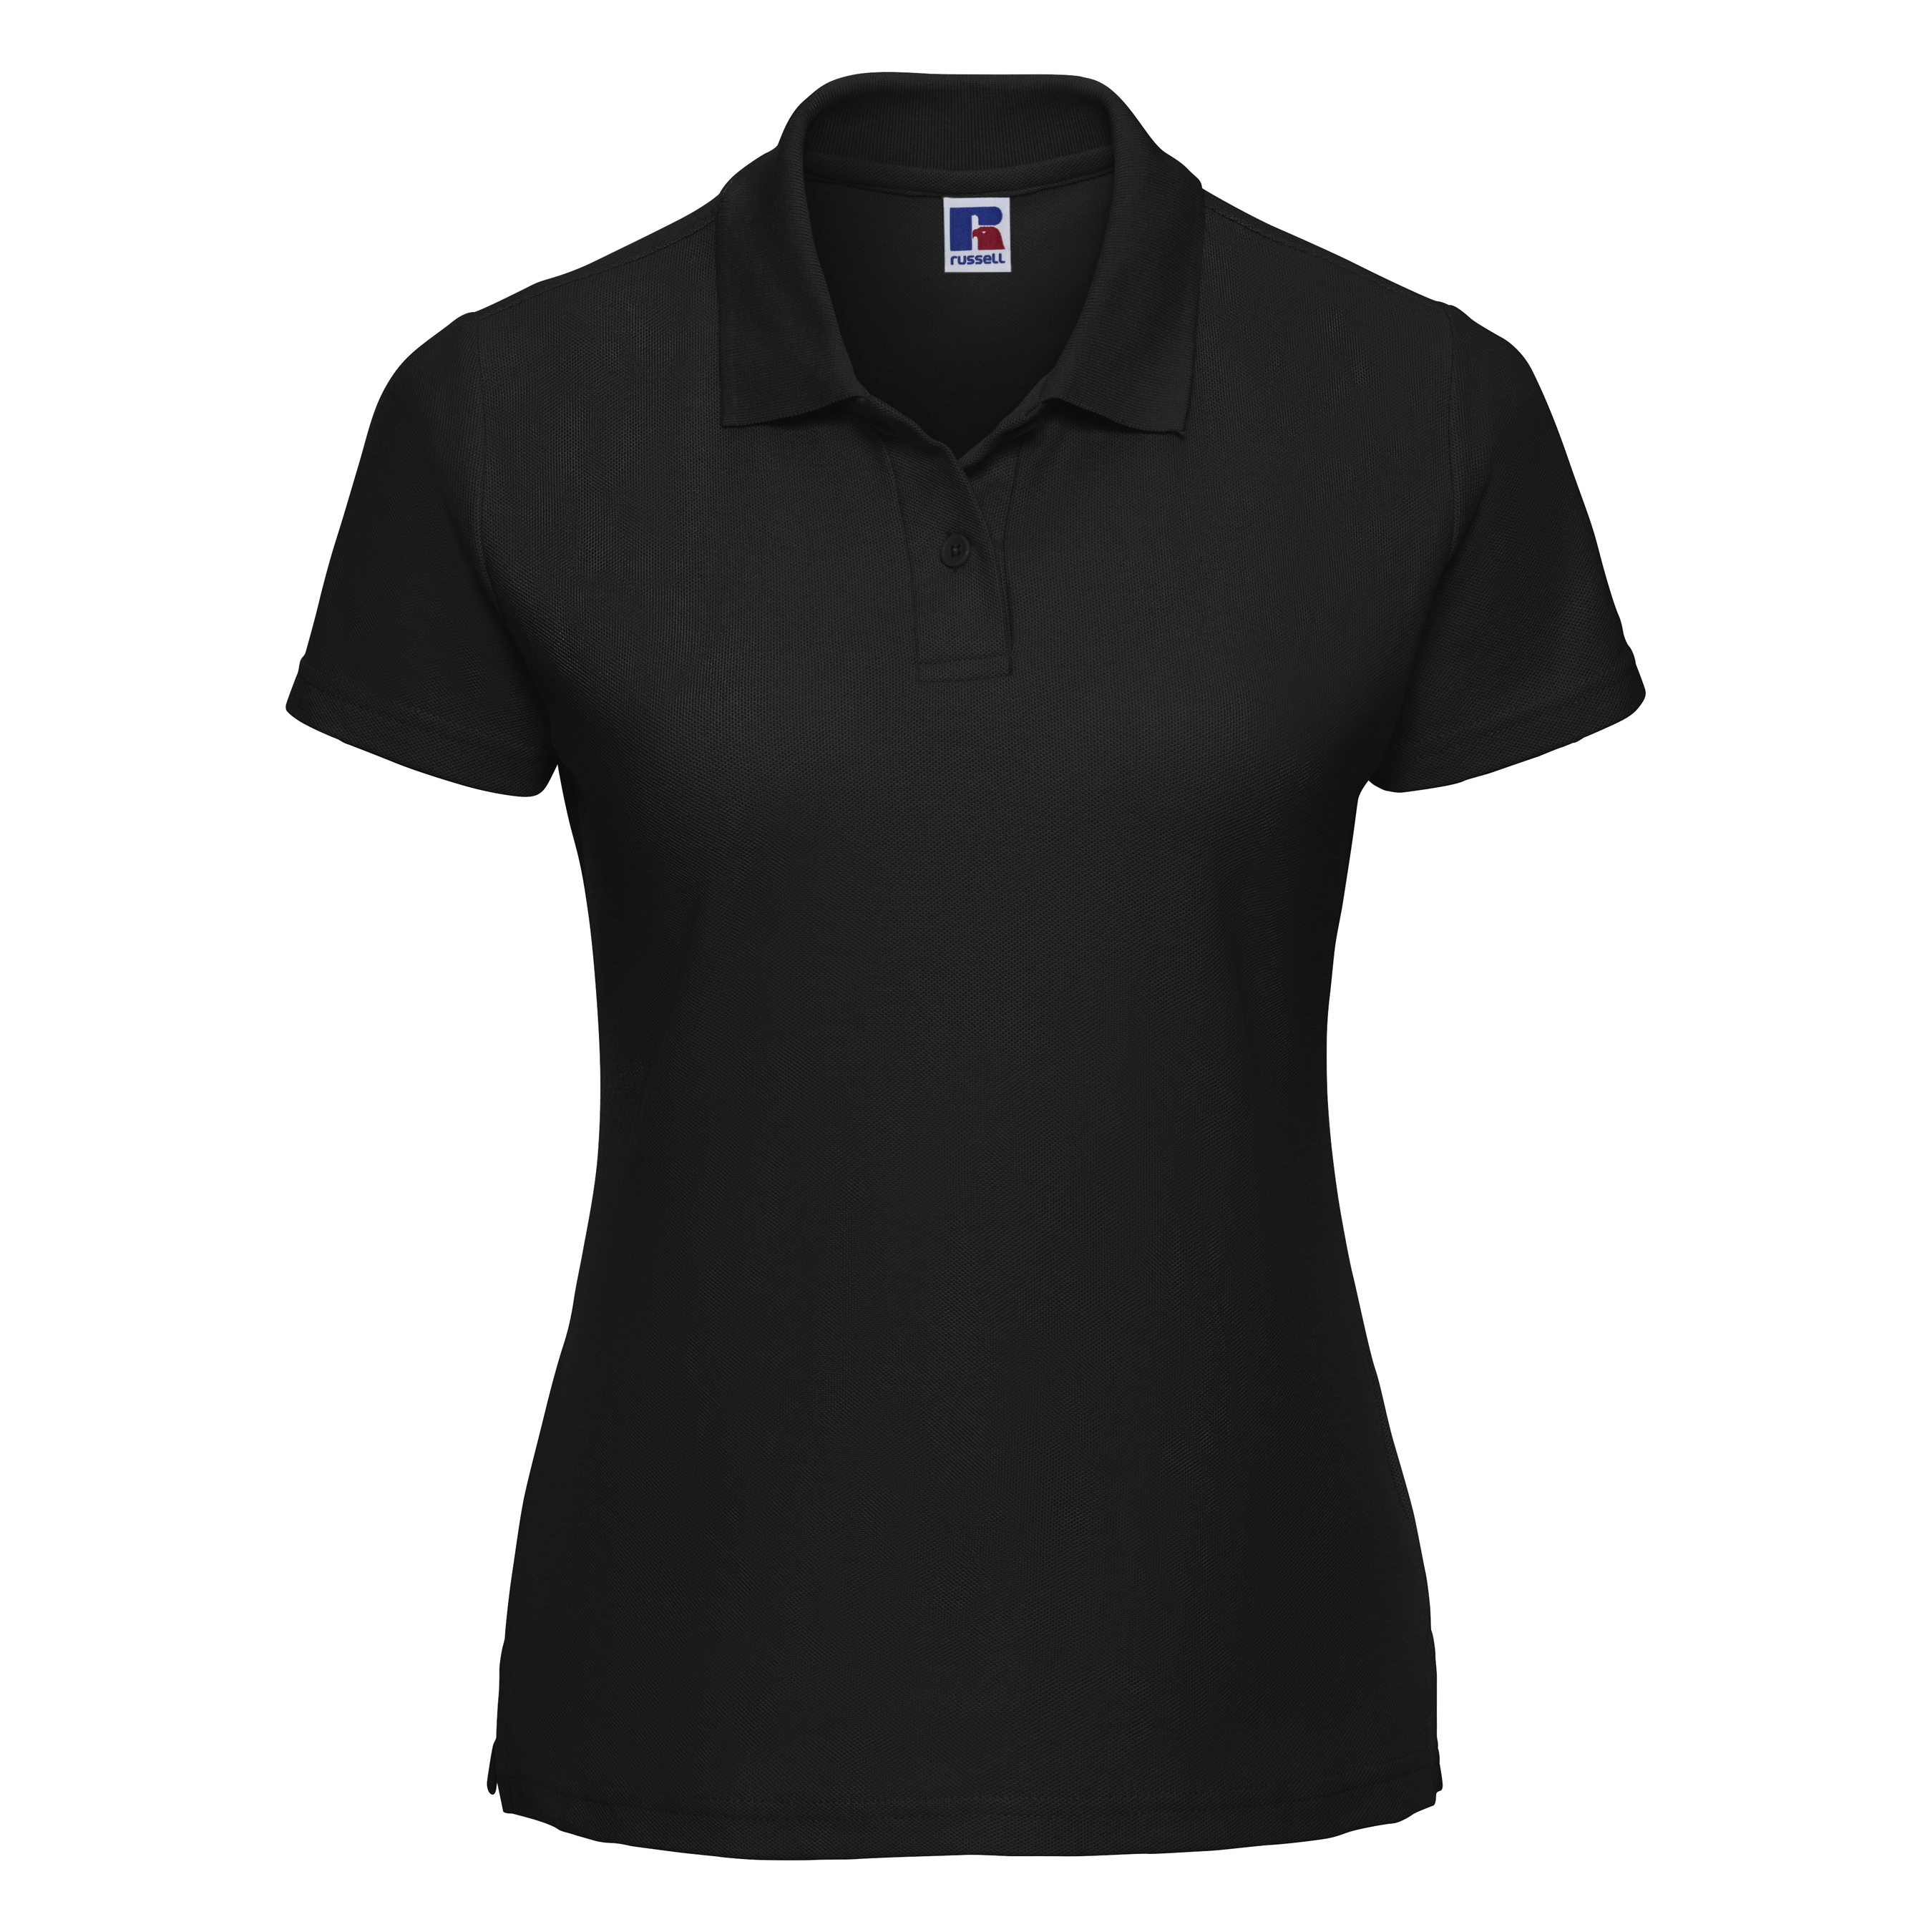 ax-httpswebsystems.s3.amazonaws.comtmp_for_downloadrussell-womens-polycotton-black.jpg